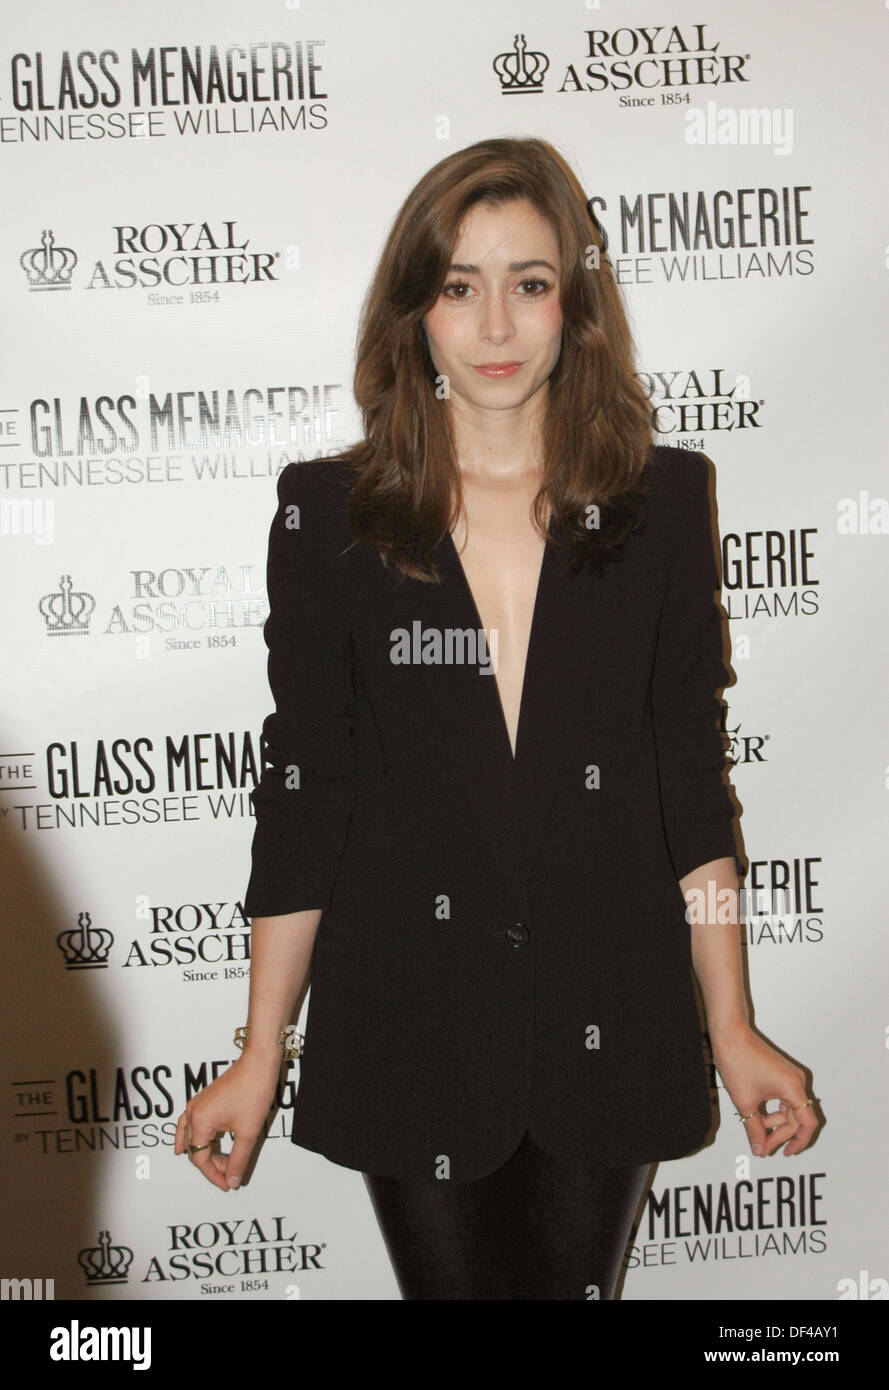 New York, USA. 26th Sep, 2013. American actress Cristin Milioto arrives at the premiere for Broadway's classic 'The Glass Menagerie' in the Booth Theatre in New York, USA, 26 September 2013. Photo: Lisa Hagen/dpa/Alamy Live News Stock Photo